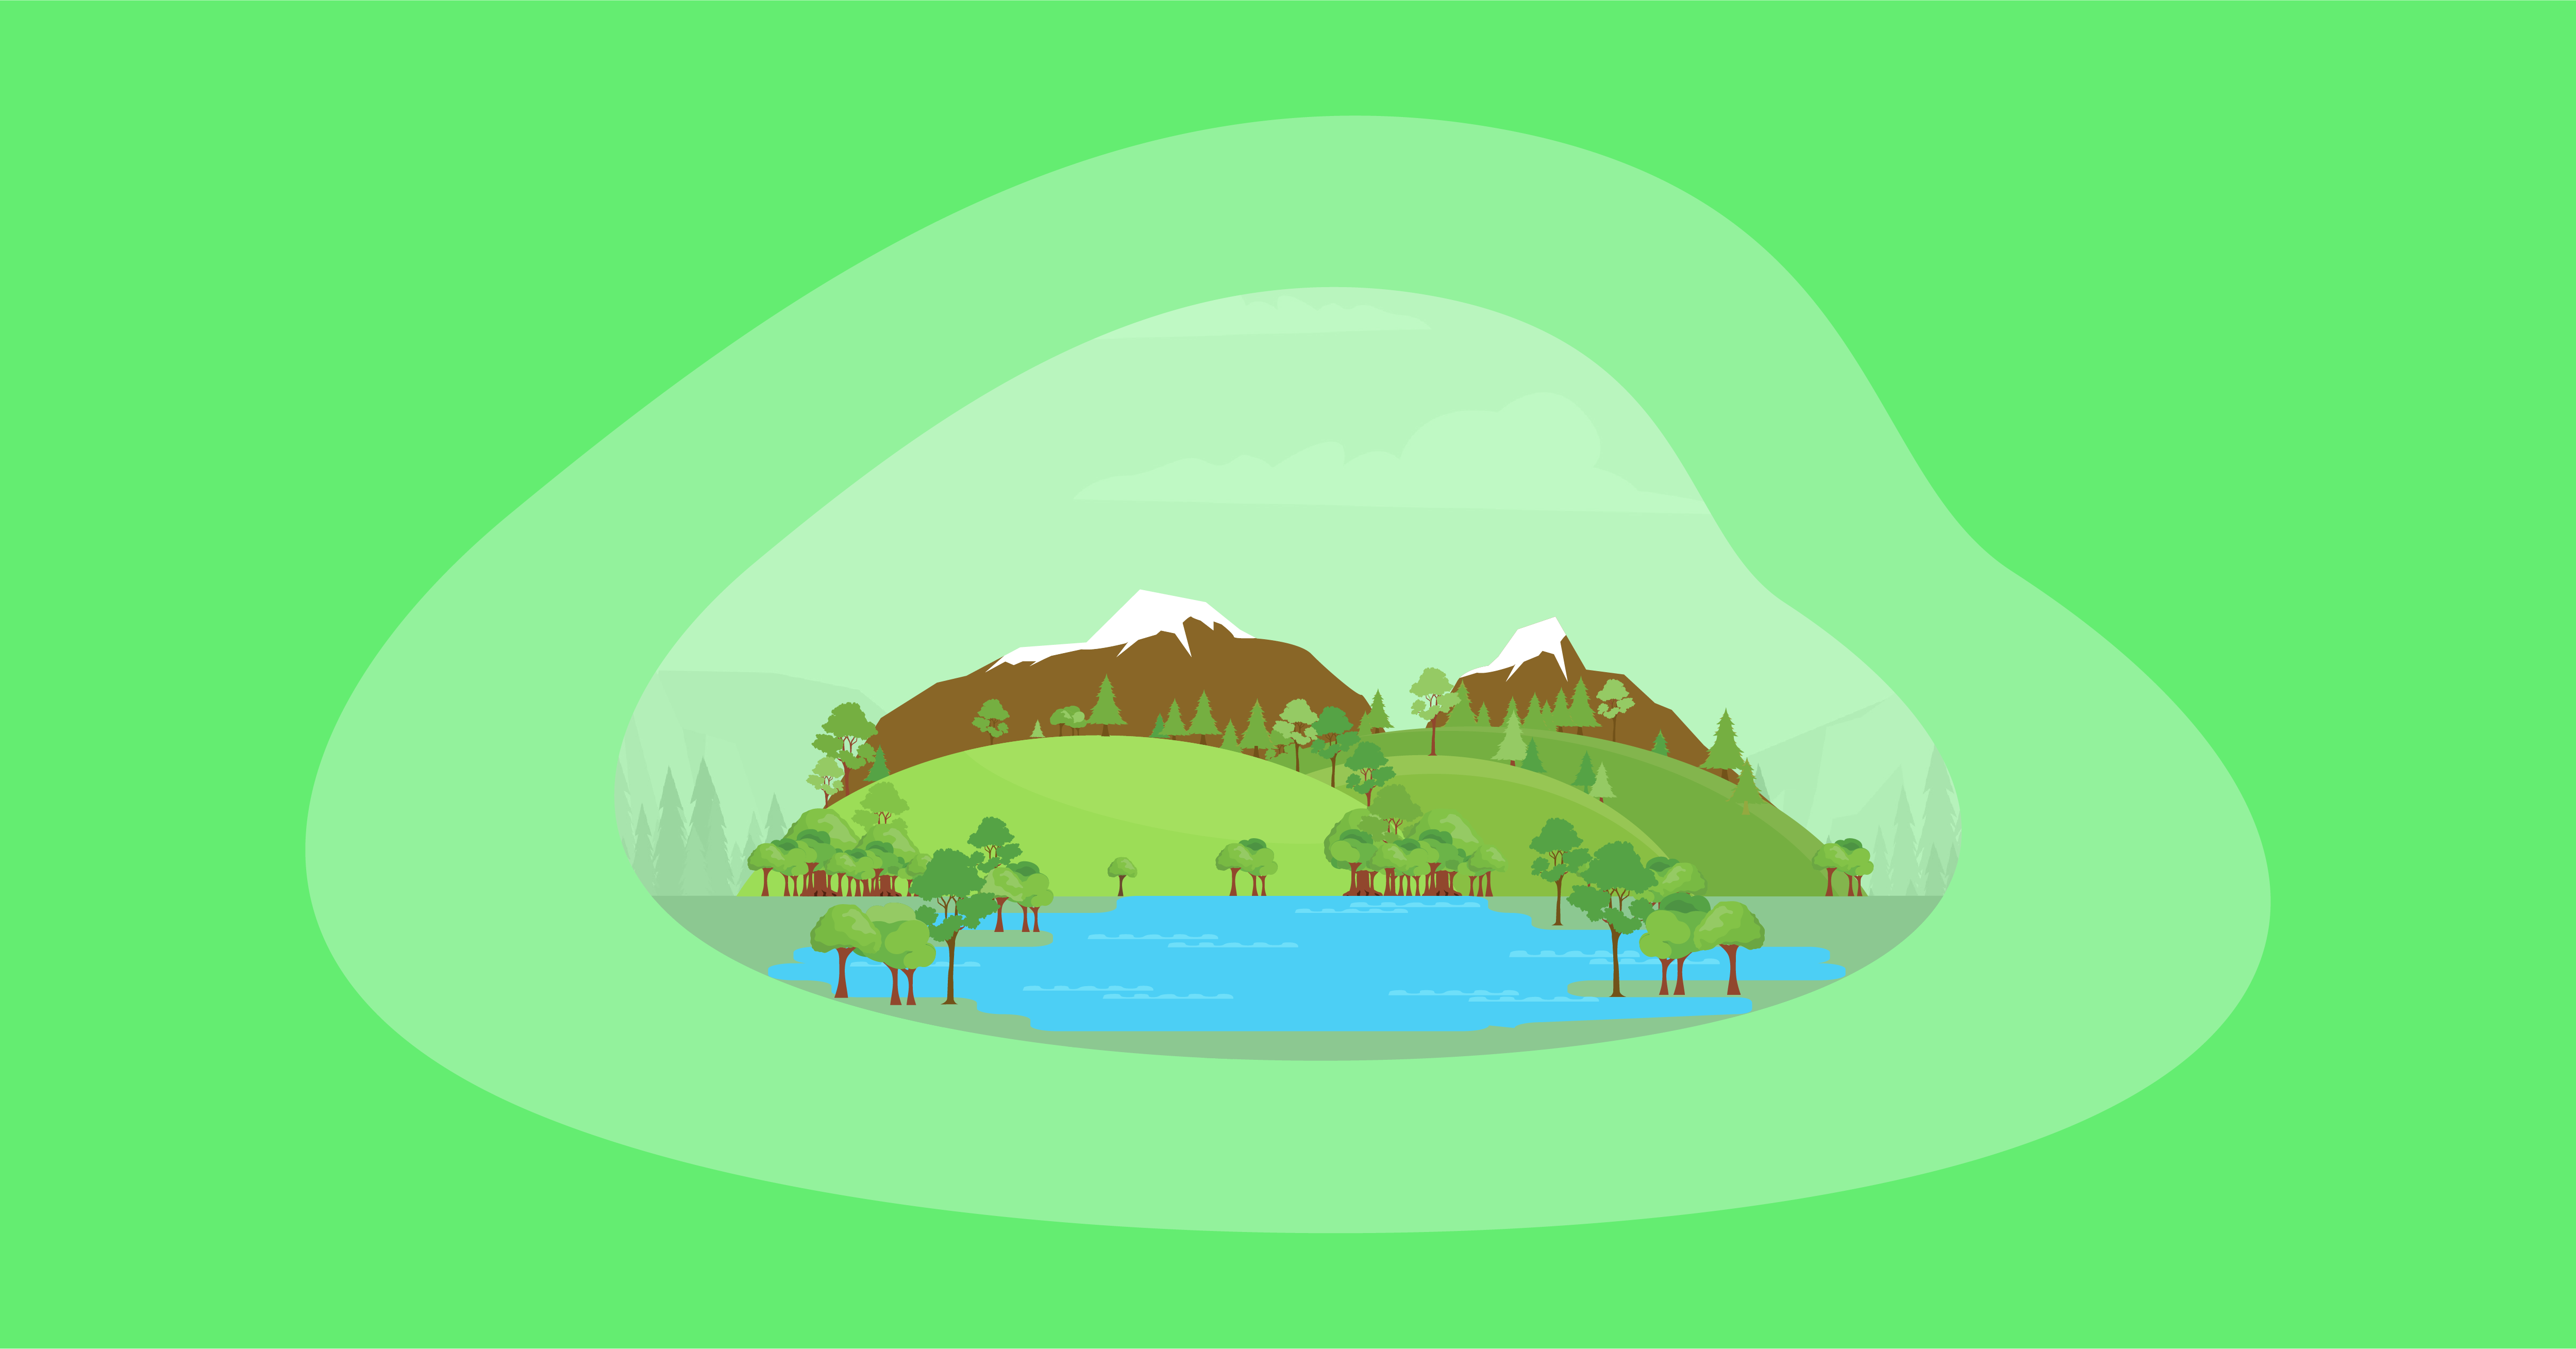 Attempted illustration of a national park